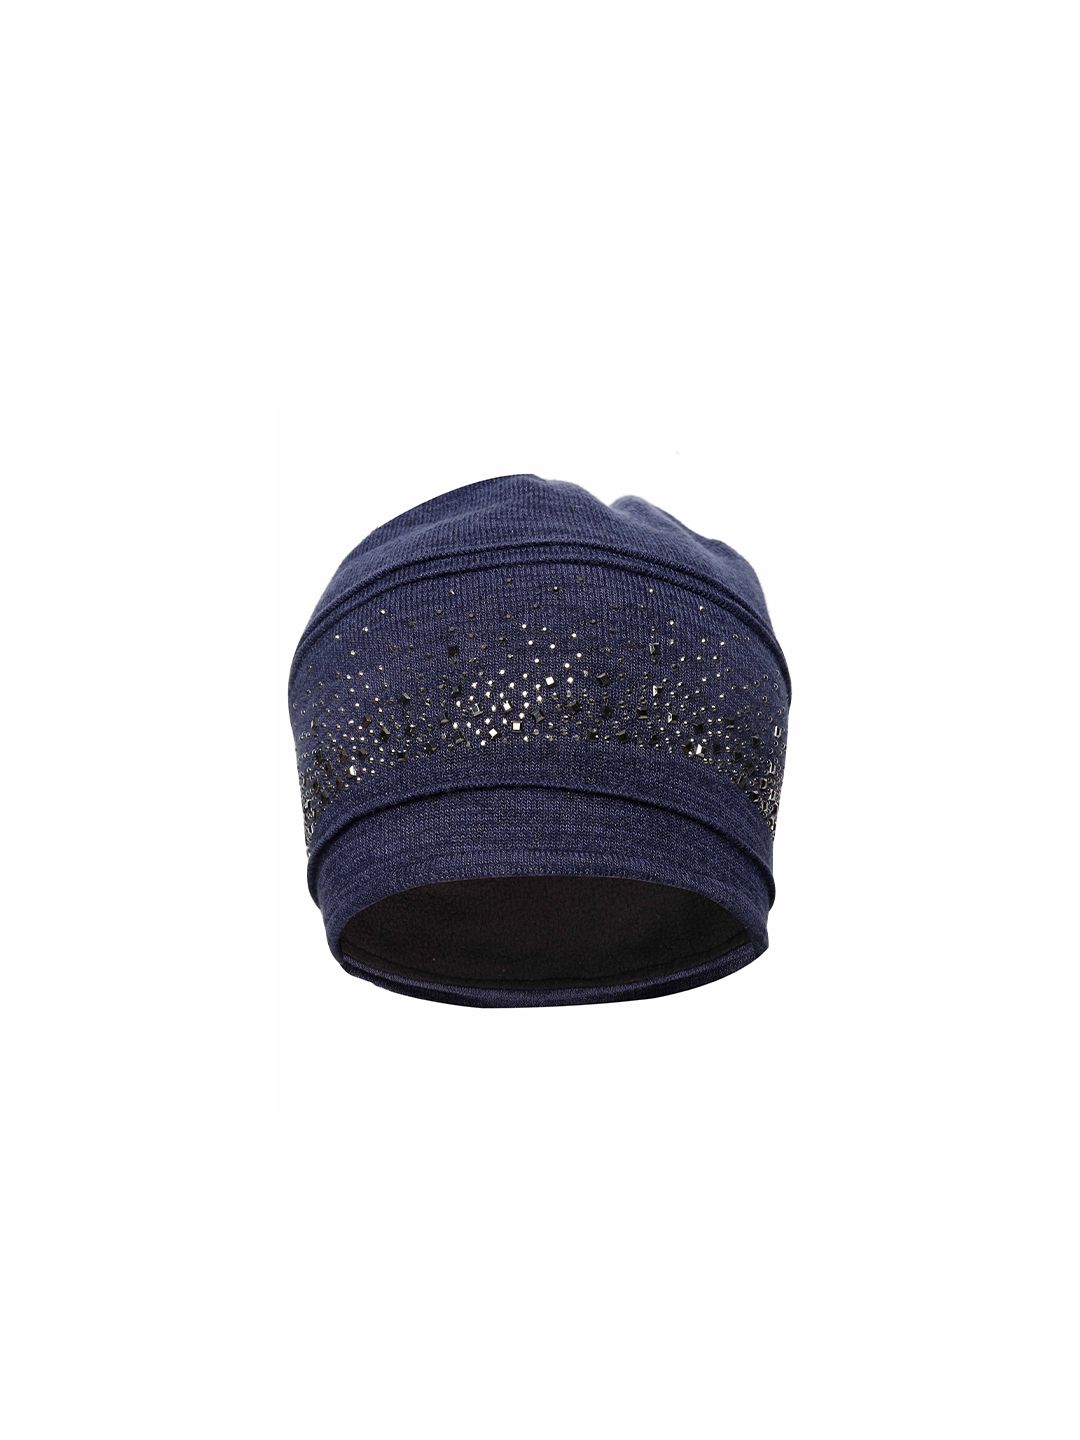 FabSeasons Women Navy Blue Embellished Beanie Price in India